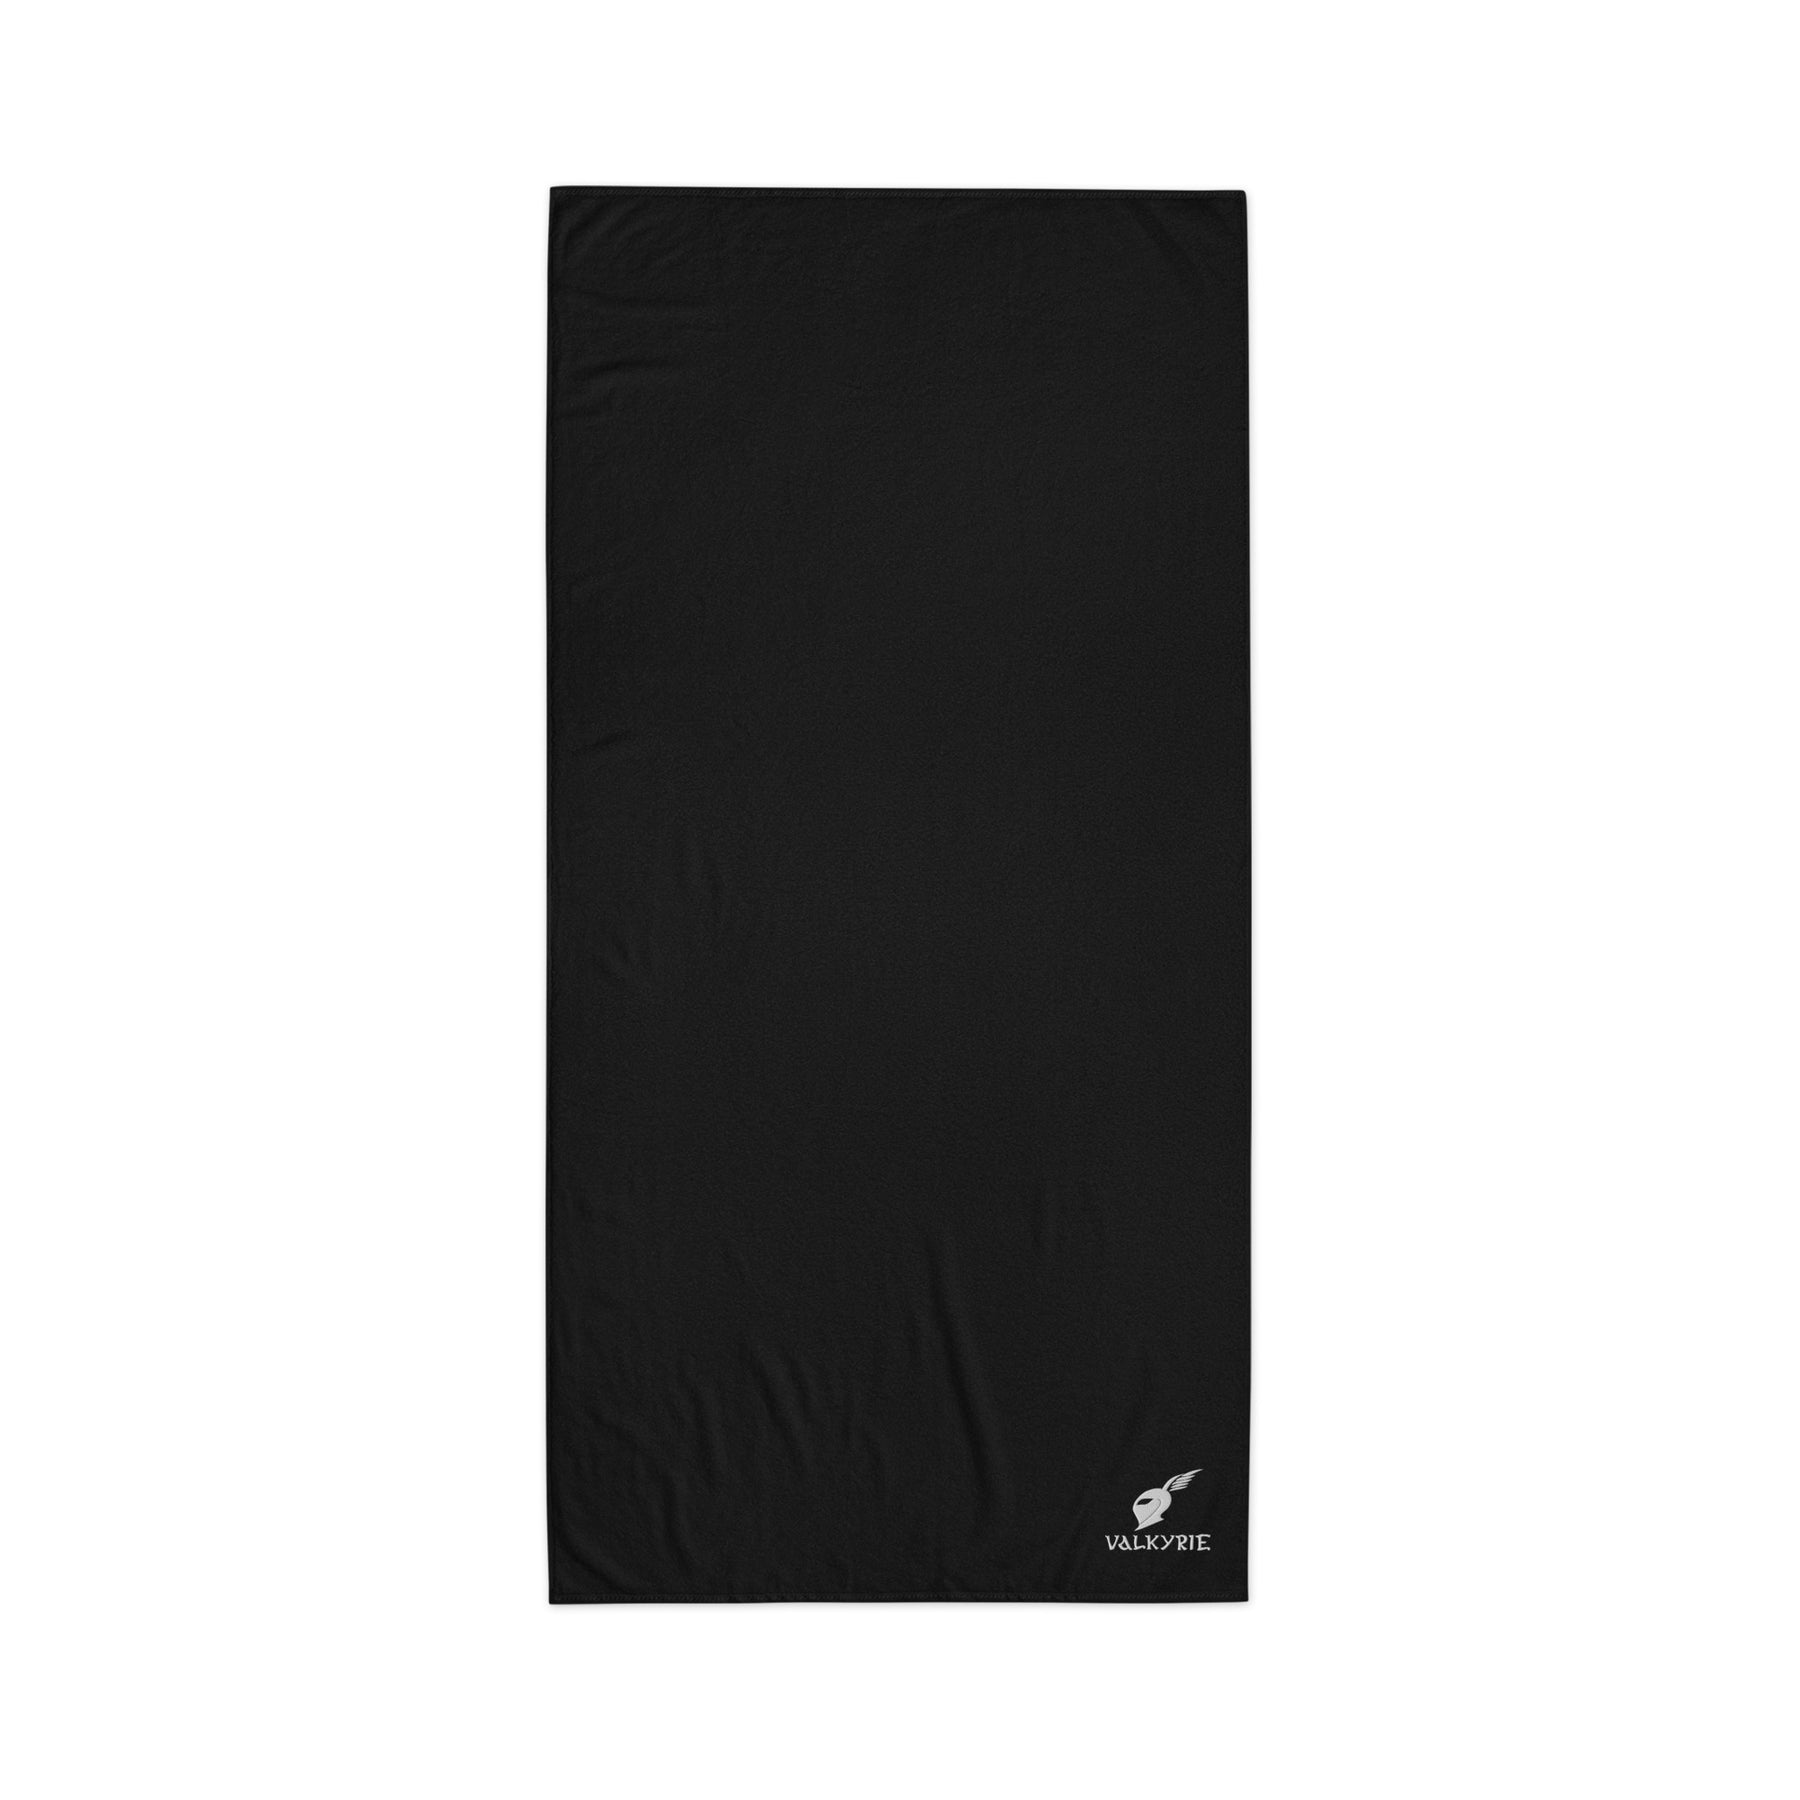 GAIA Aerospace - Know Where Your Valkyrie Towel Is